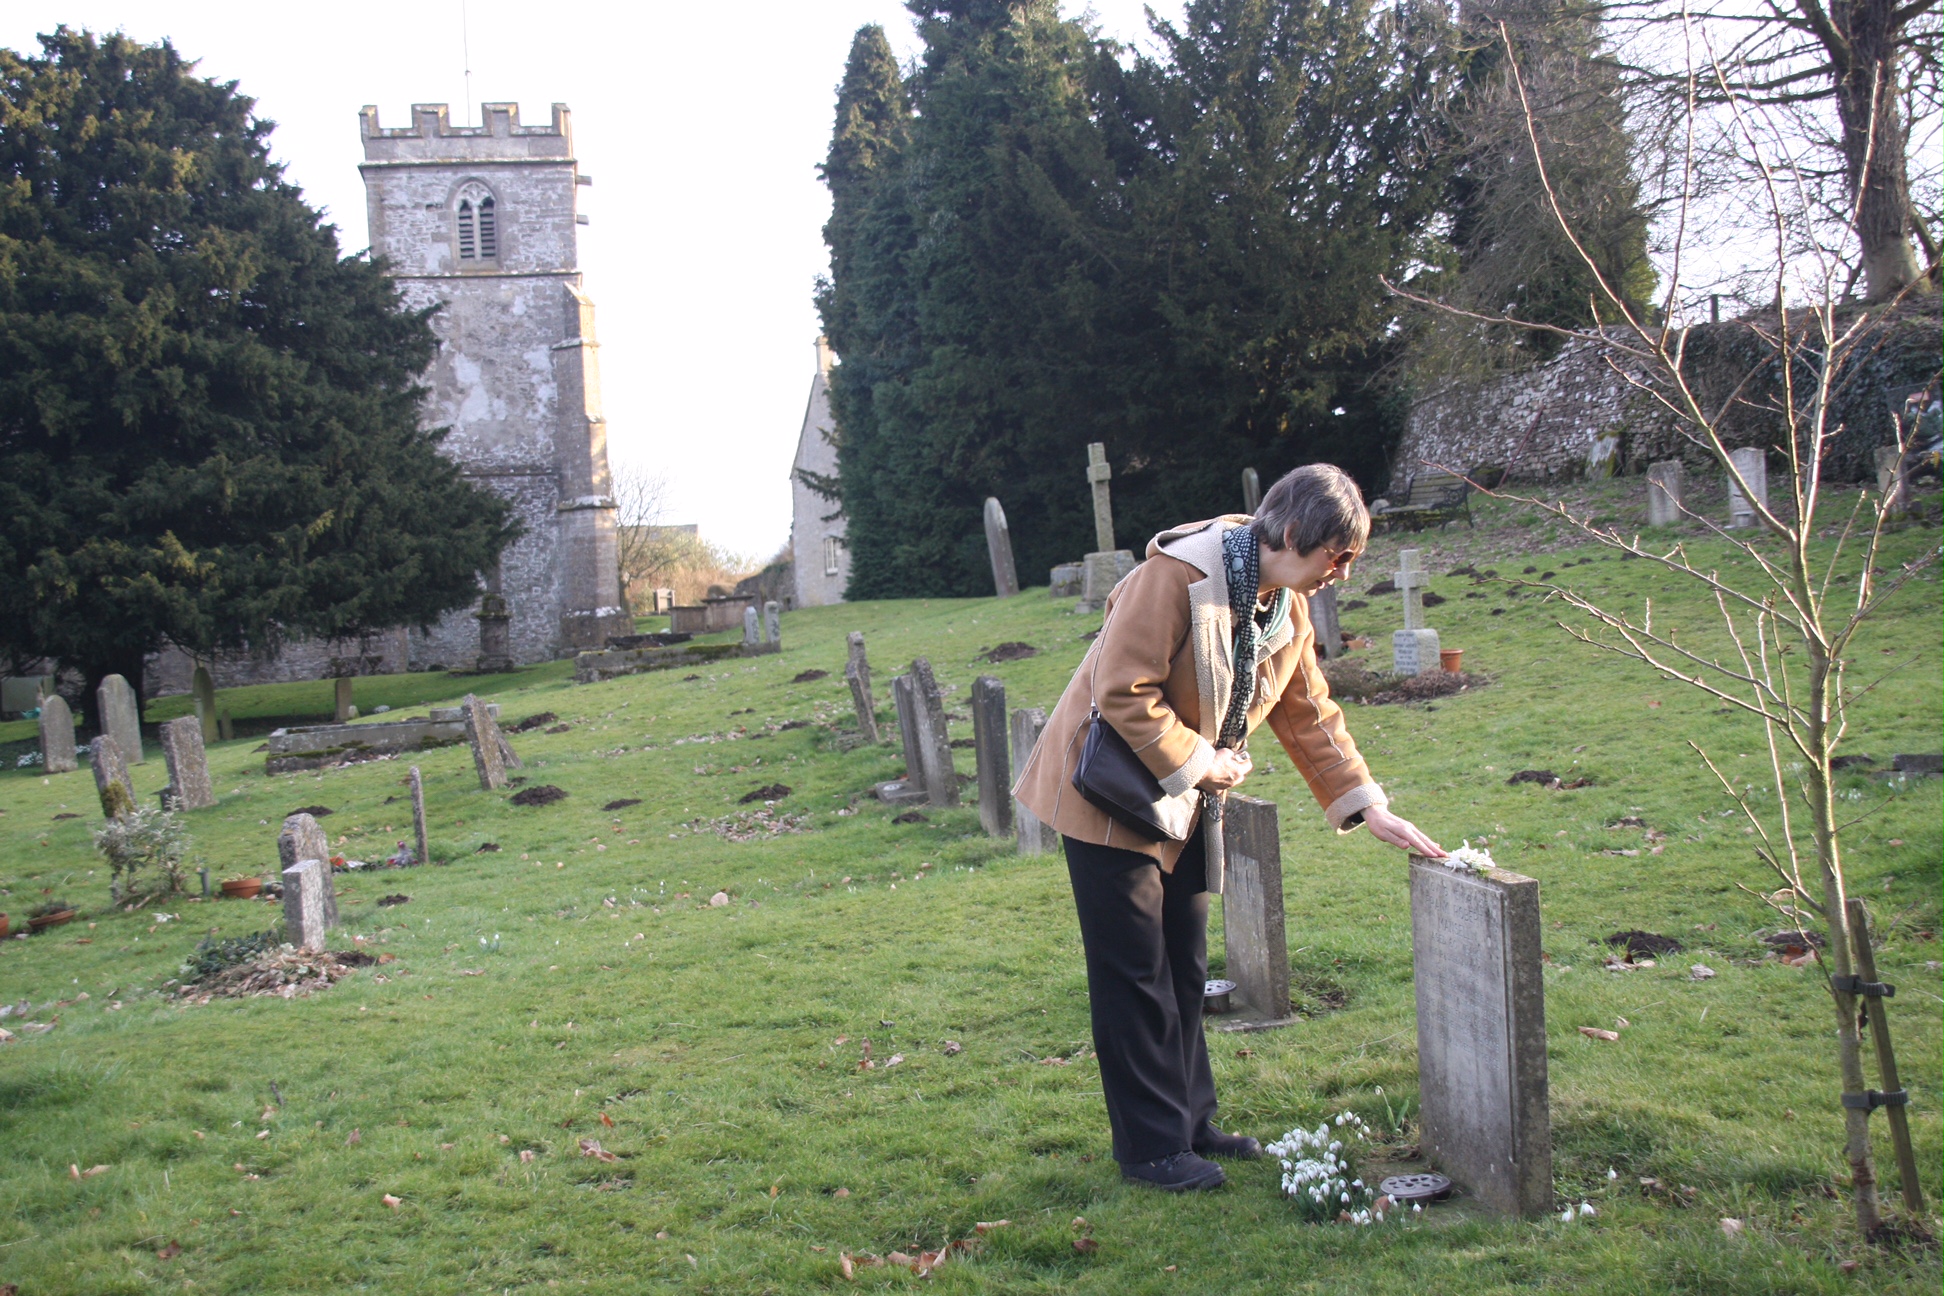 Frank Mansell - Diddley placing snowdrops on Frank's grave.